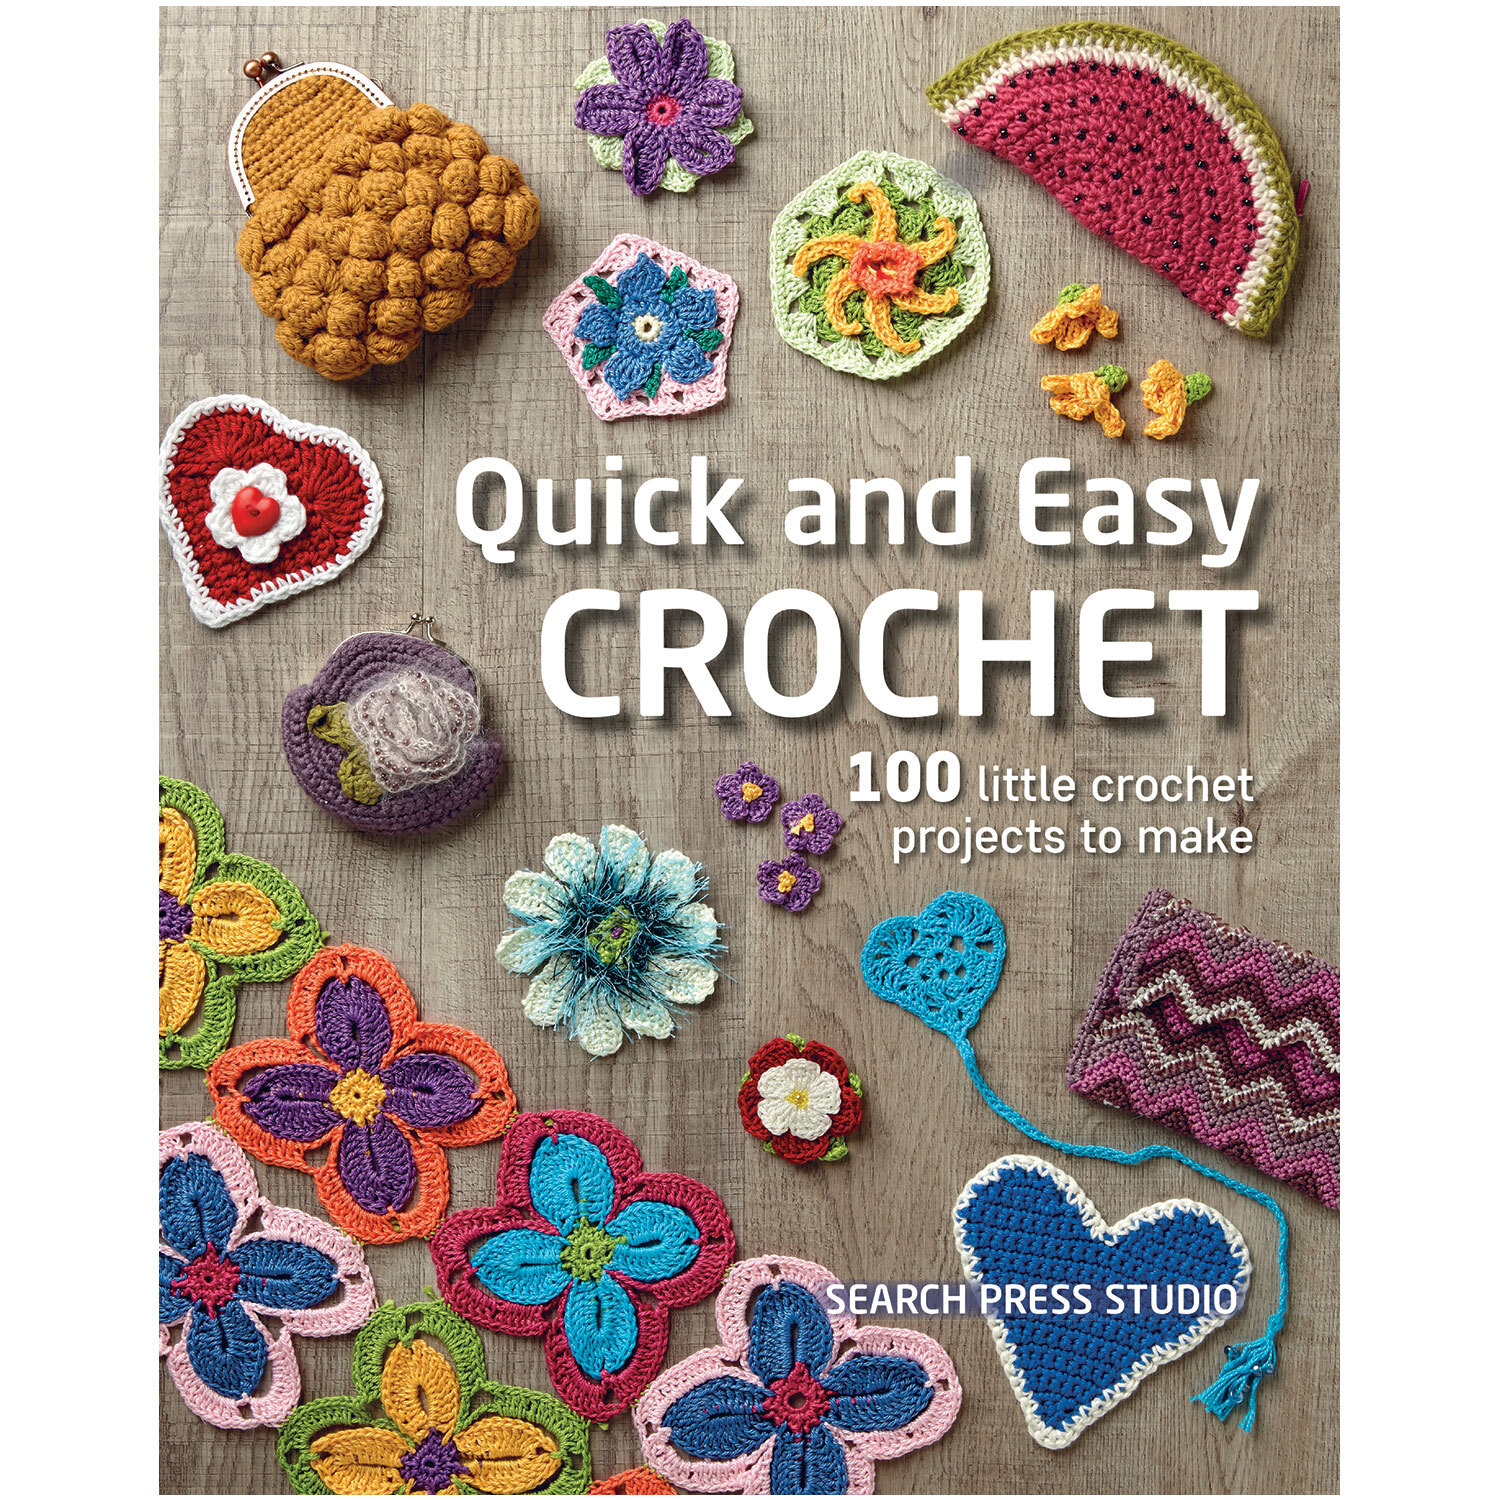 Quick and Easy Crochet Book Image